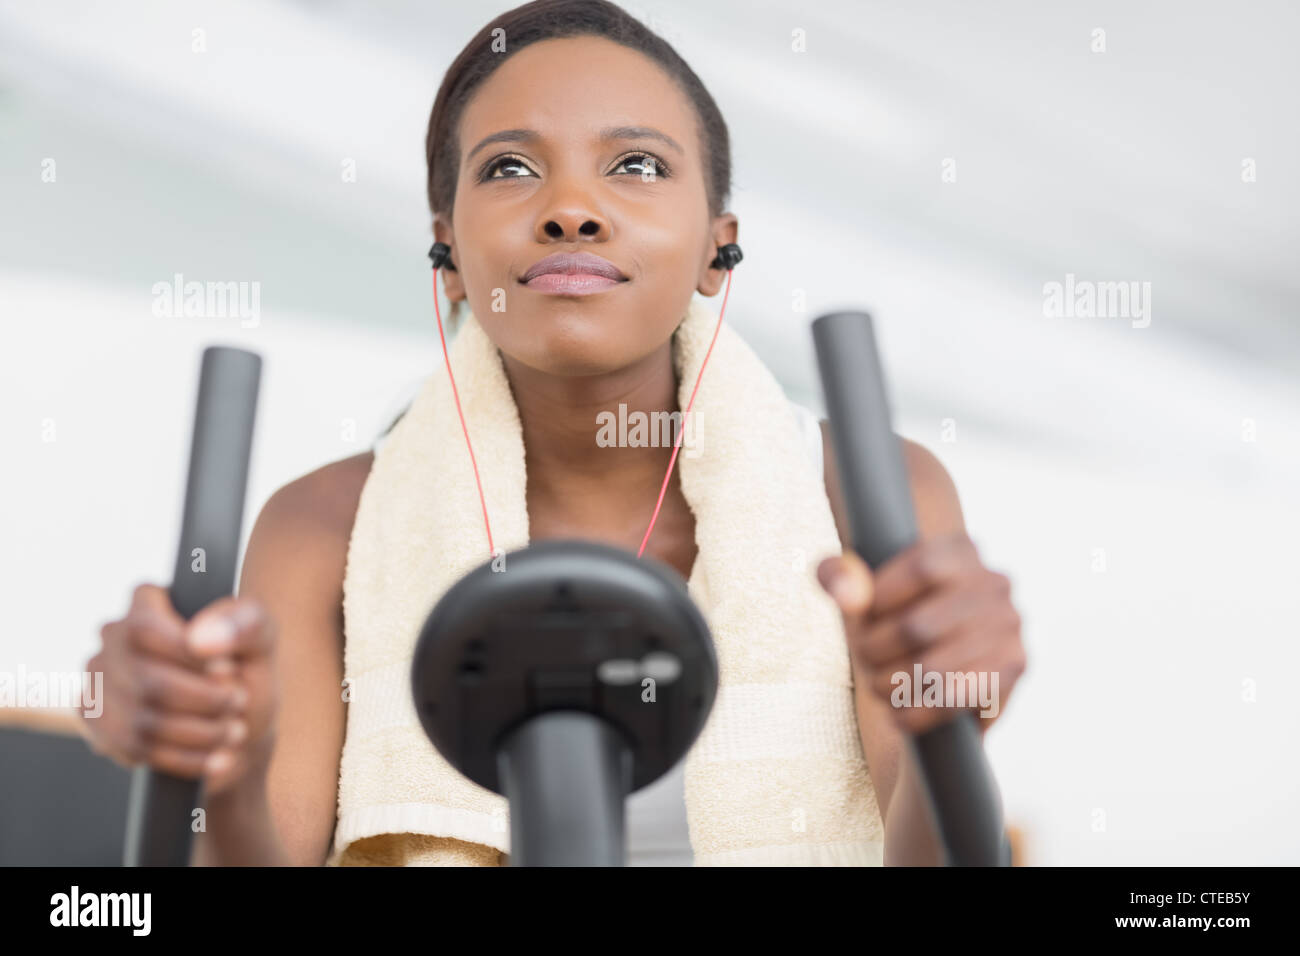 Low angle view of a black woman doing exercise bike Stock Photo